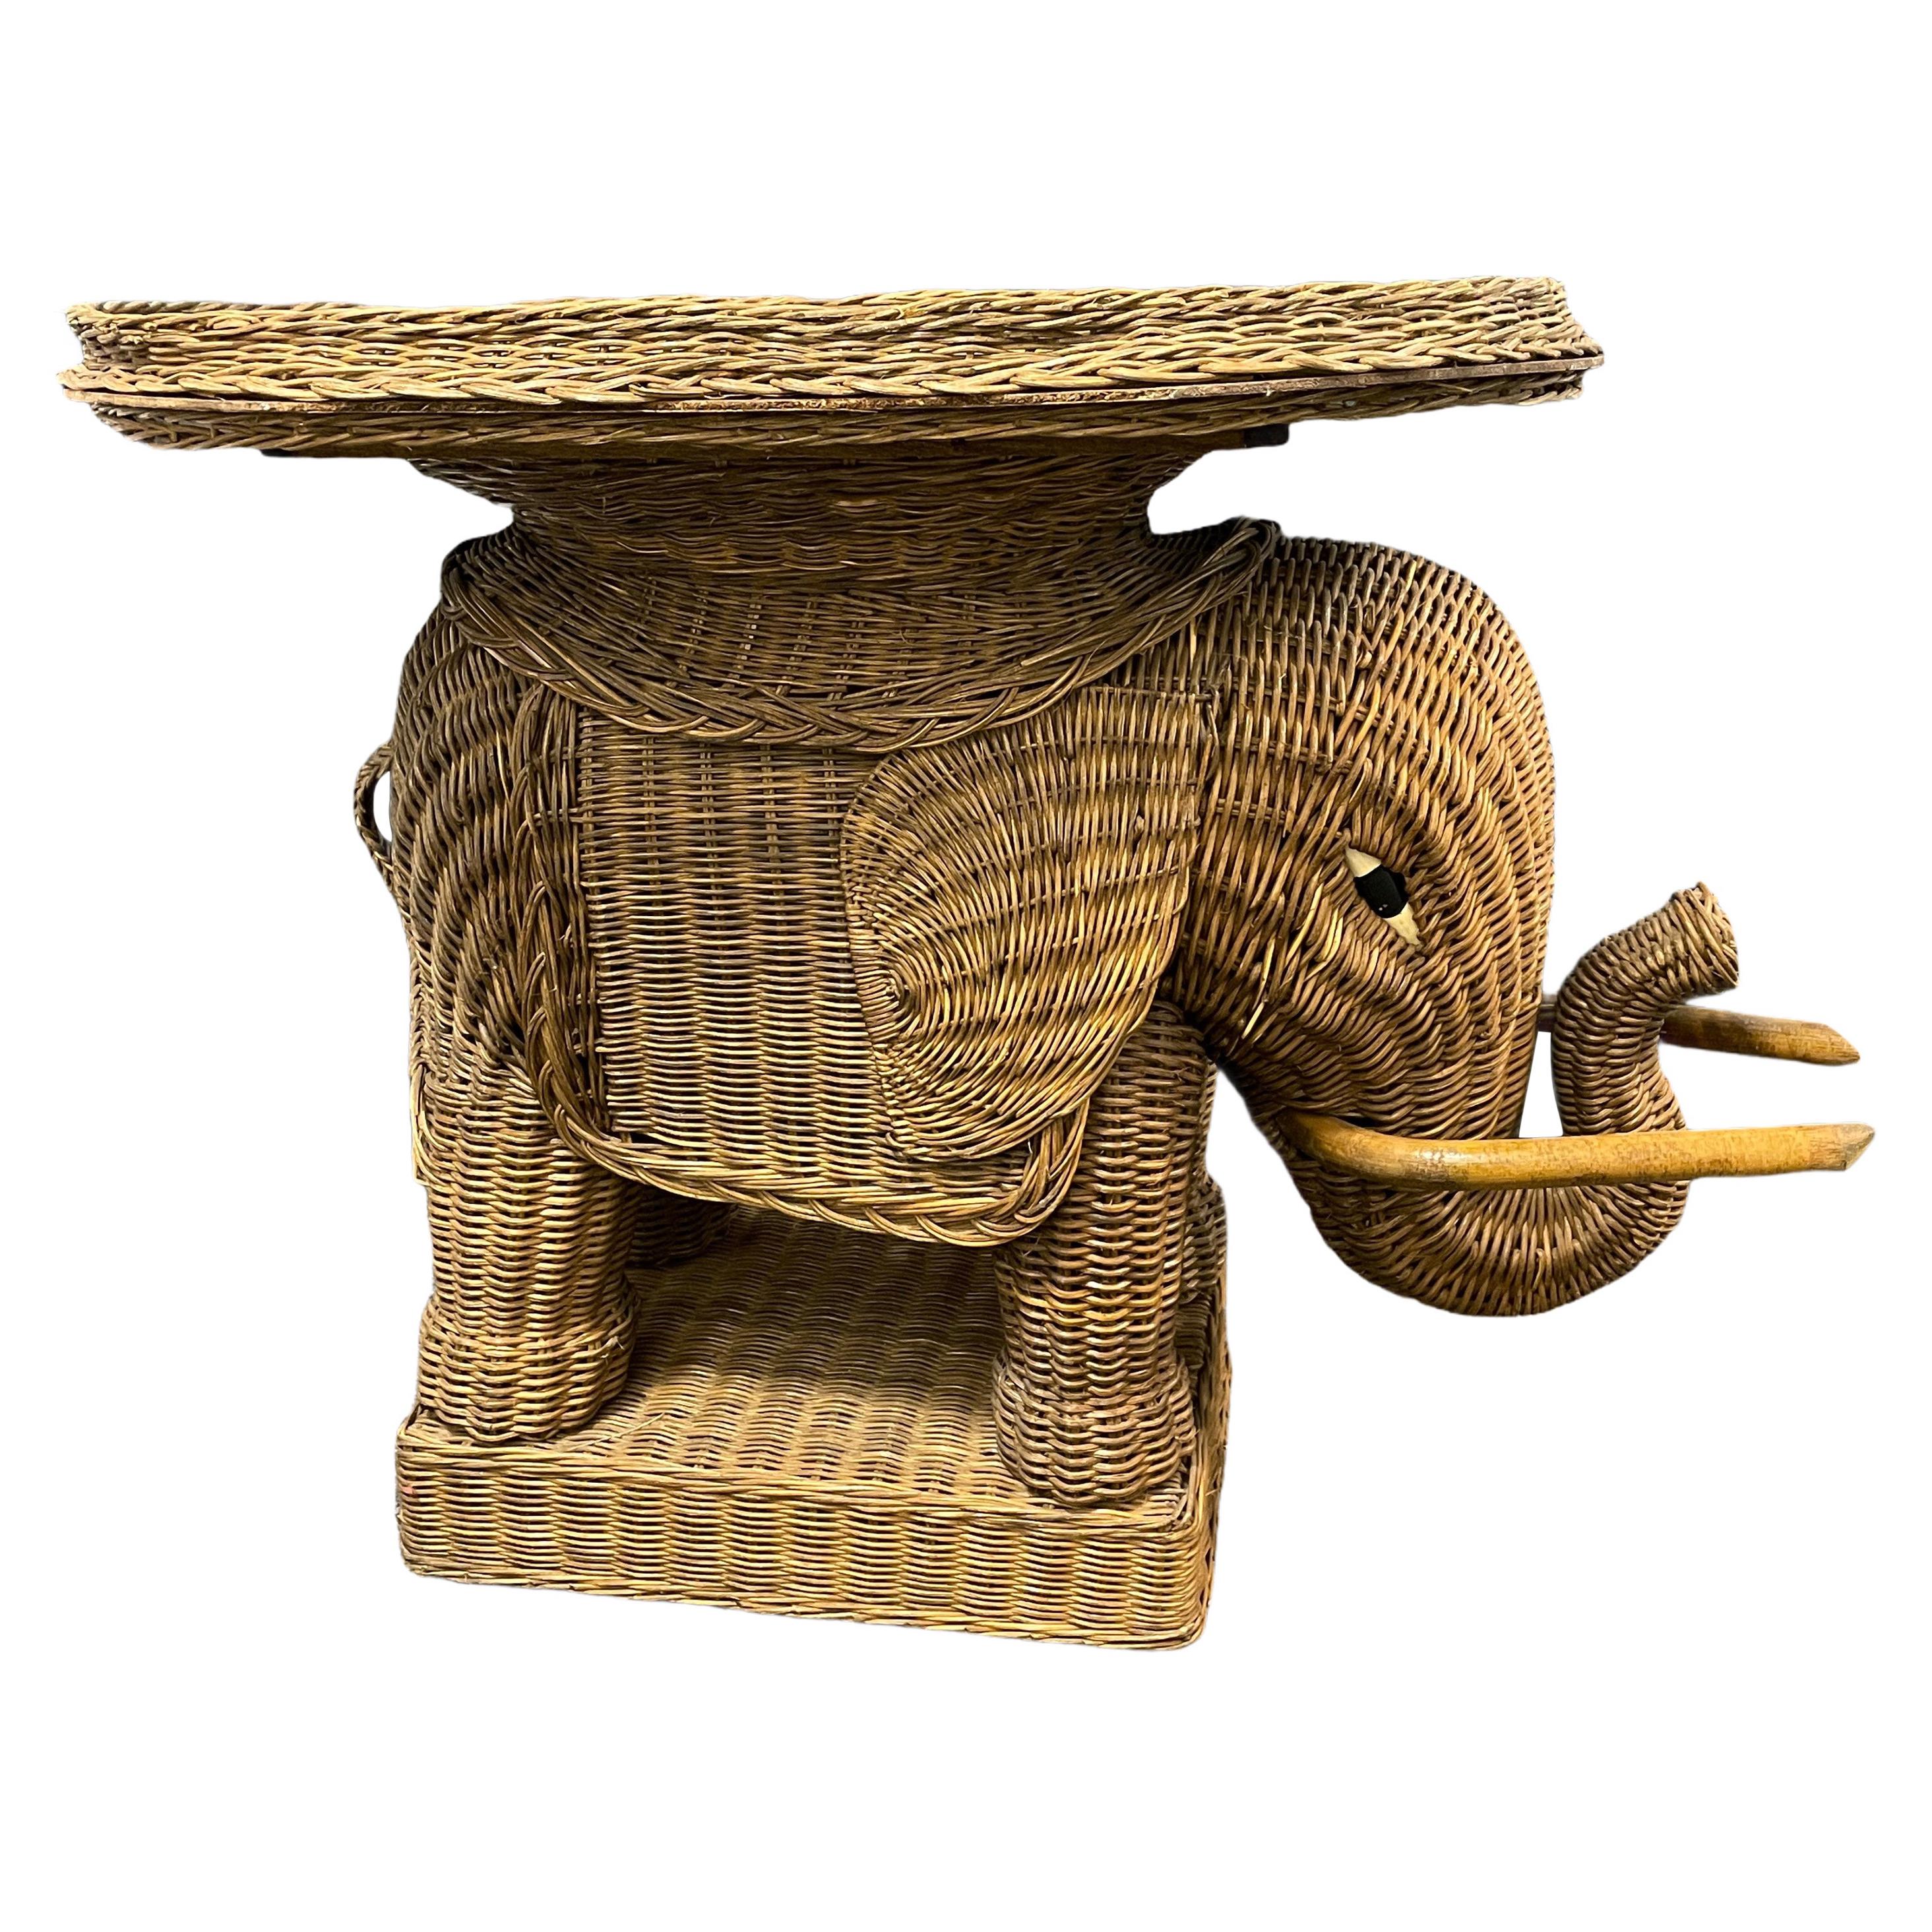 Stunning Rattan Wicker Elephant Side Table with Large Tray, France, 1960s